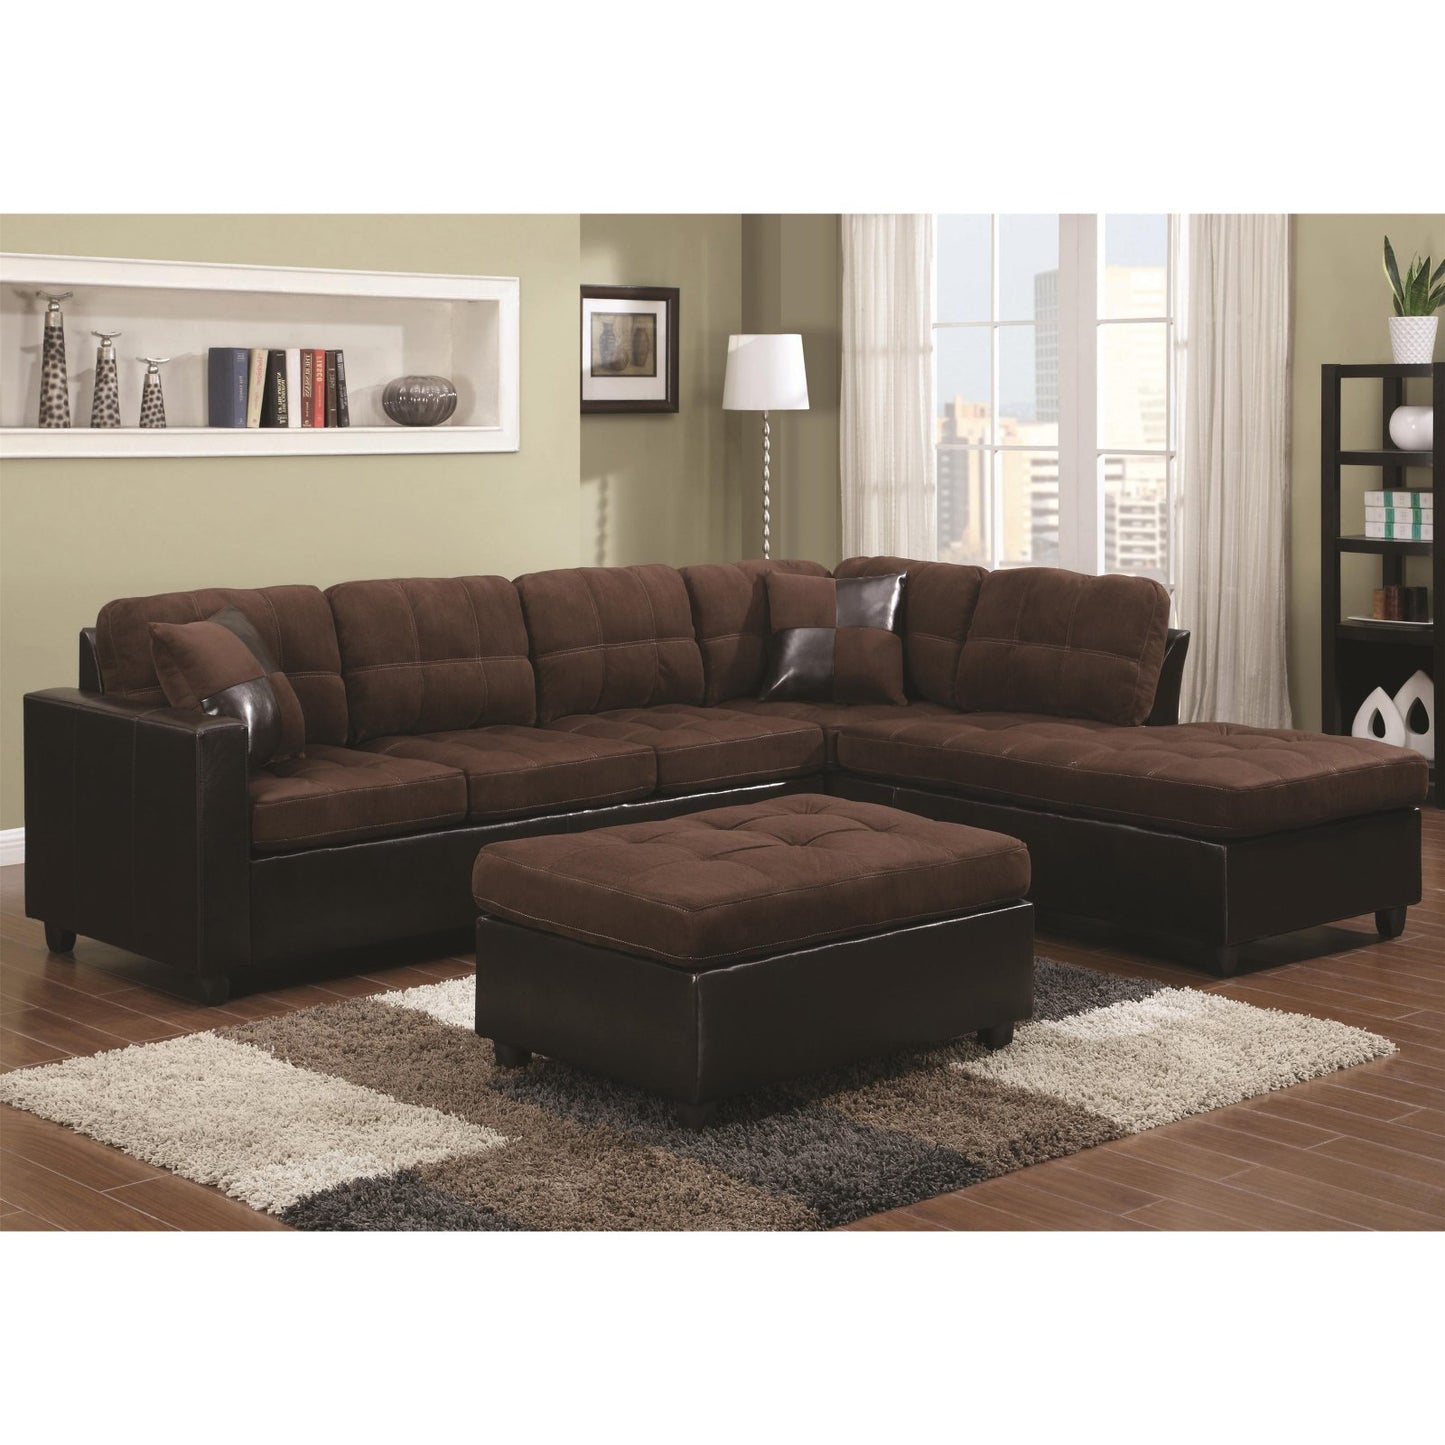 Mallory Upholstered Sectional Chocolate and Dark Brown